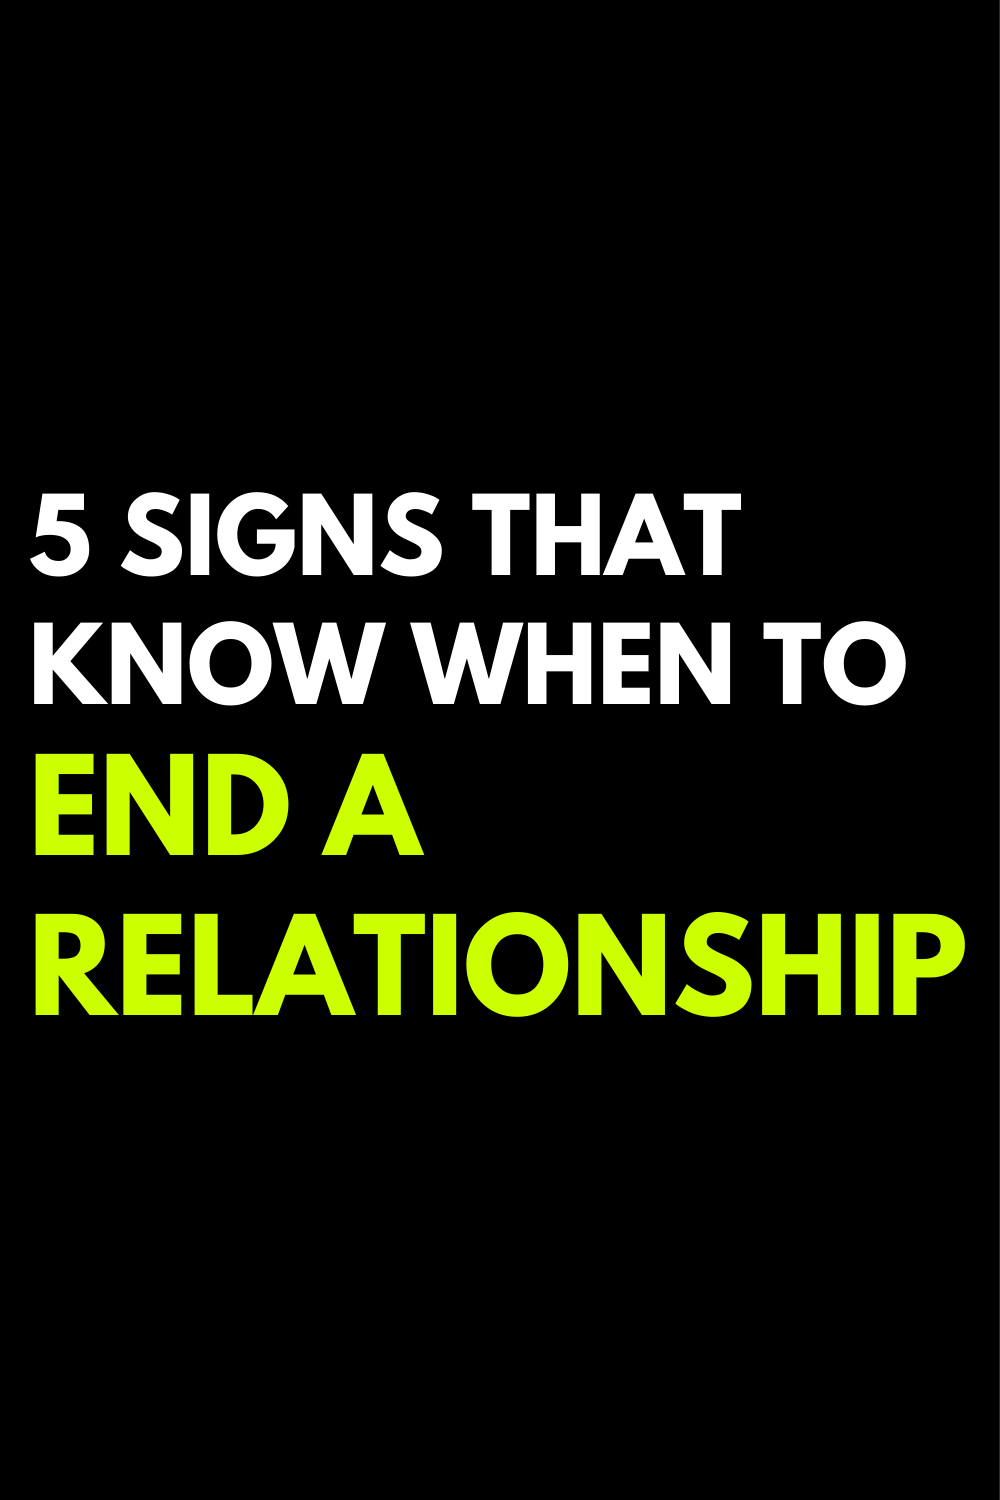 5 signs that know when to end a relationship